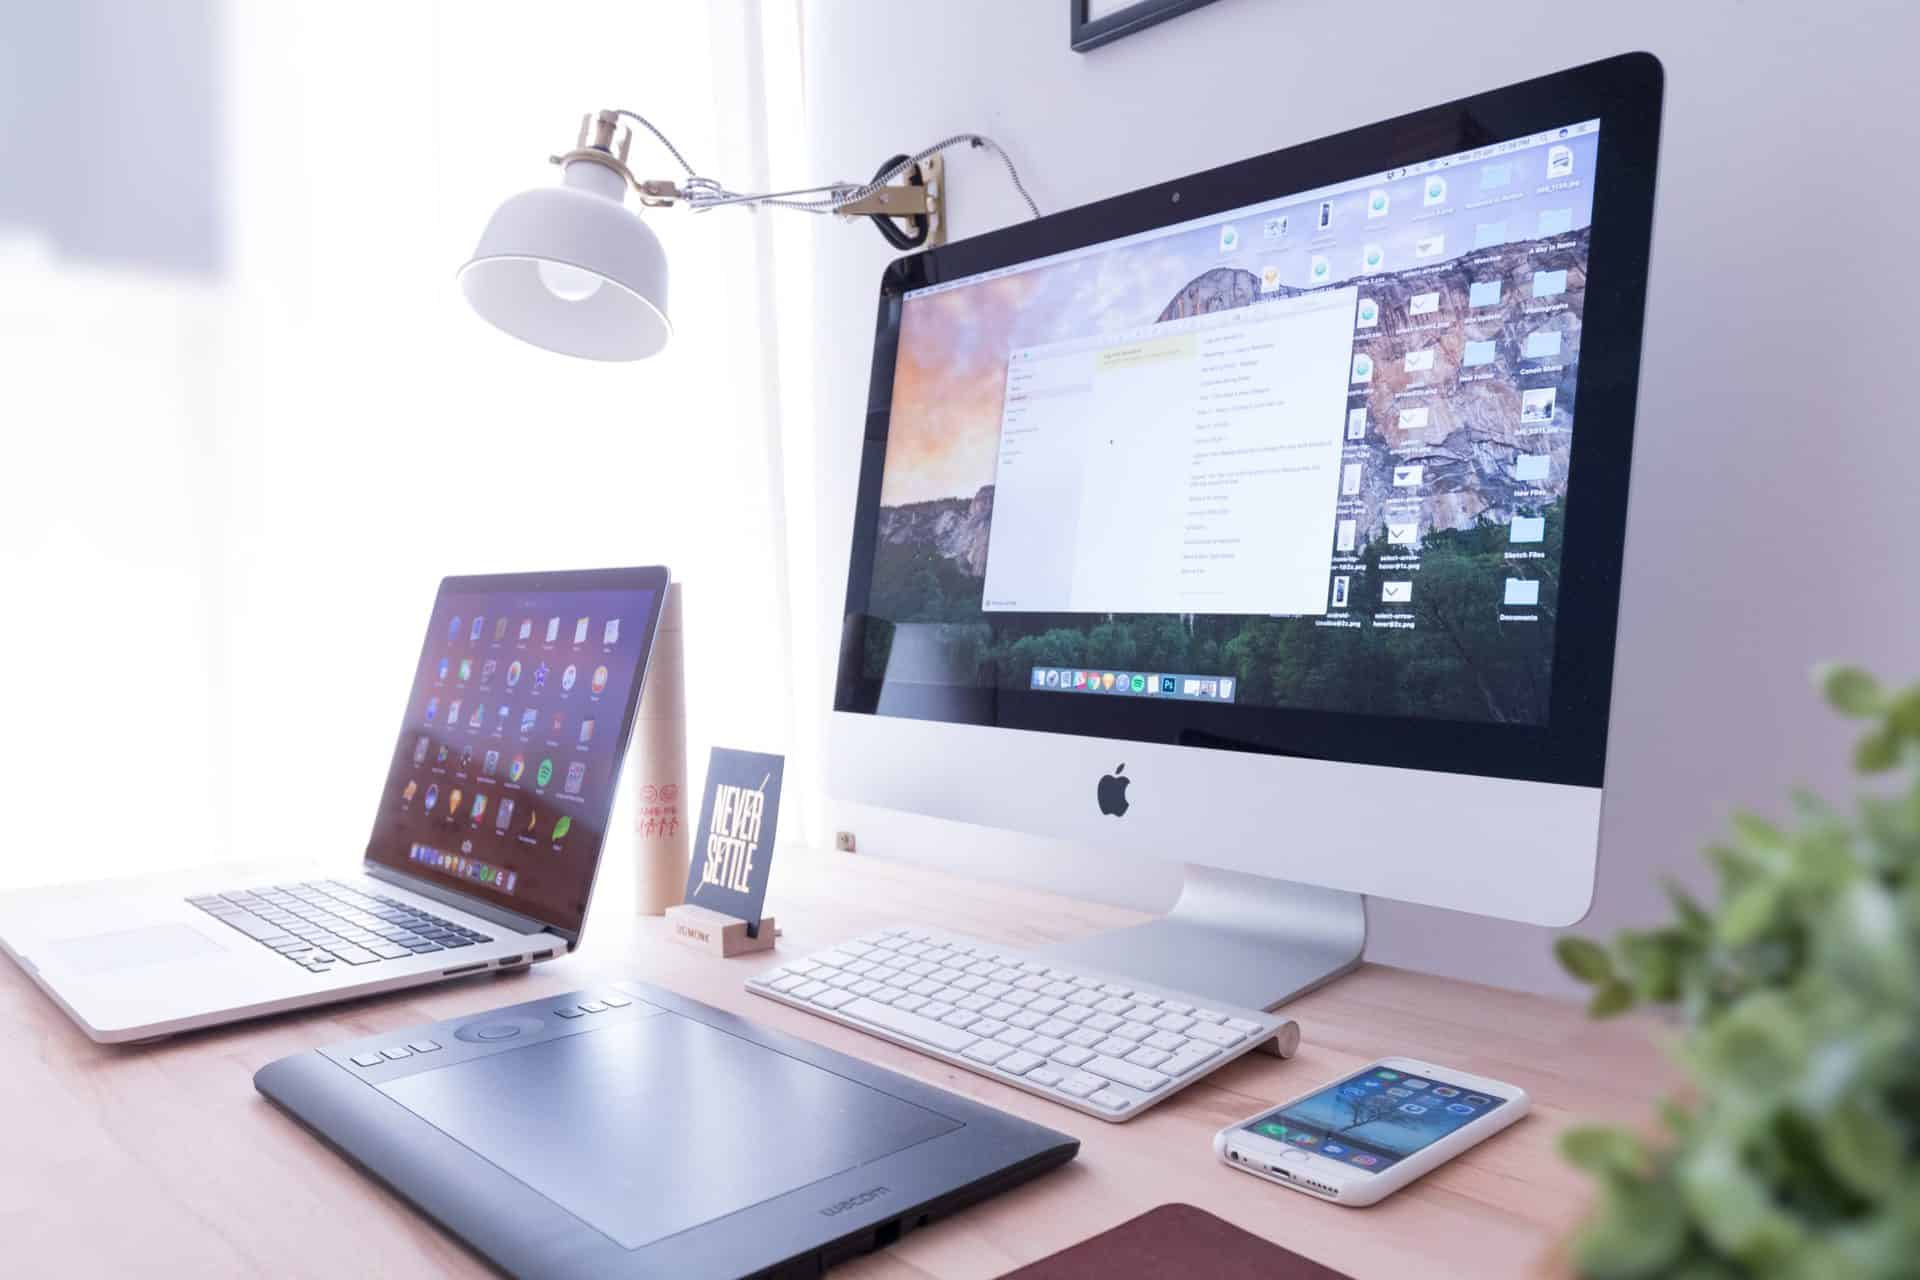 Different devices on a desk including an iMac, a laptop, a tablet, and a phone.